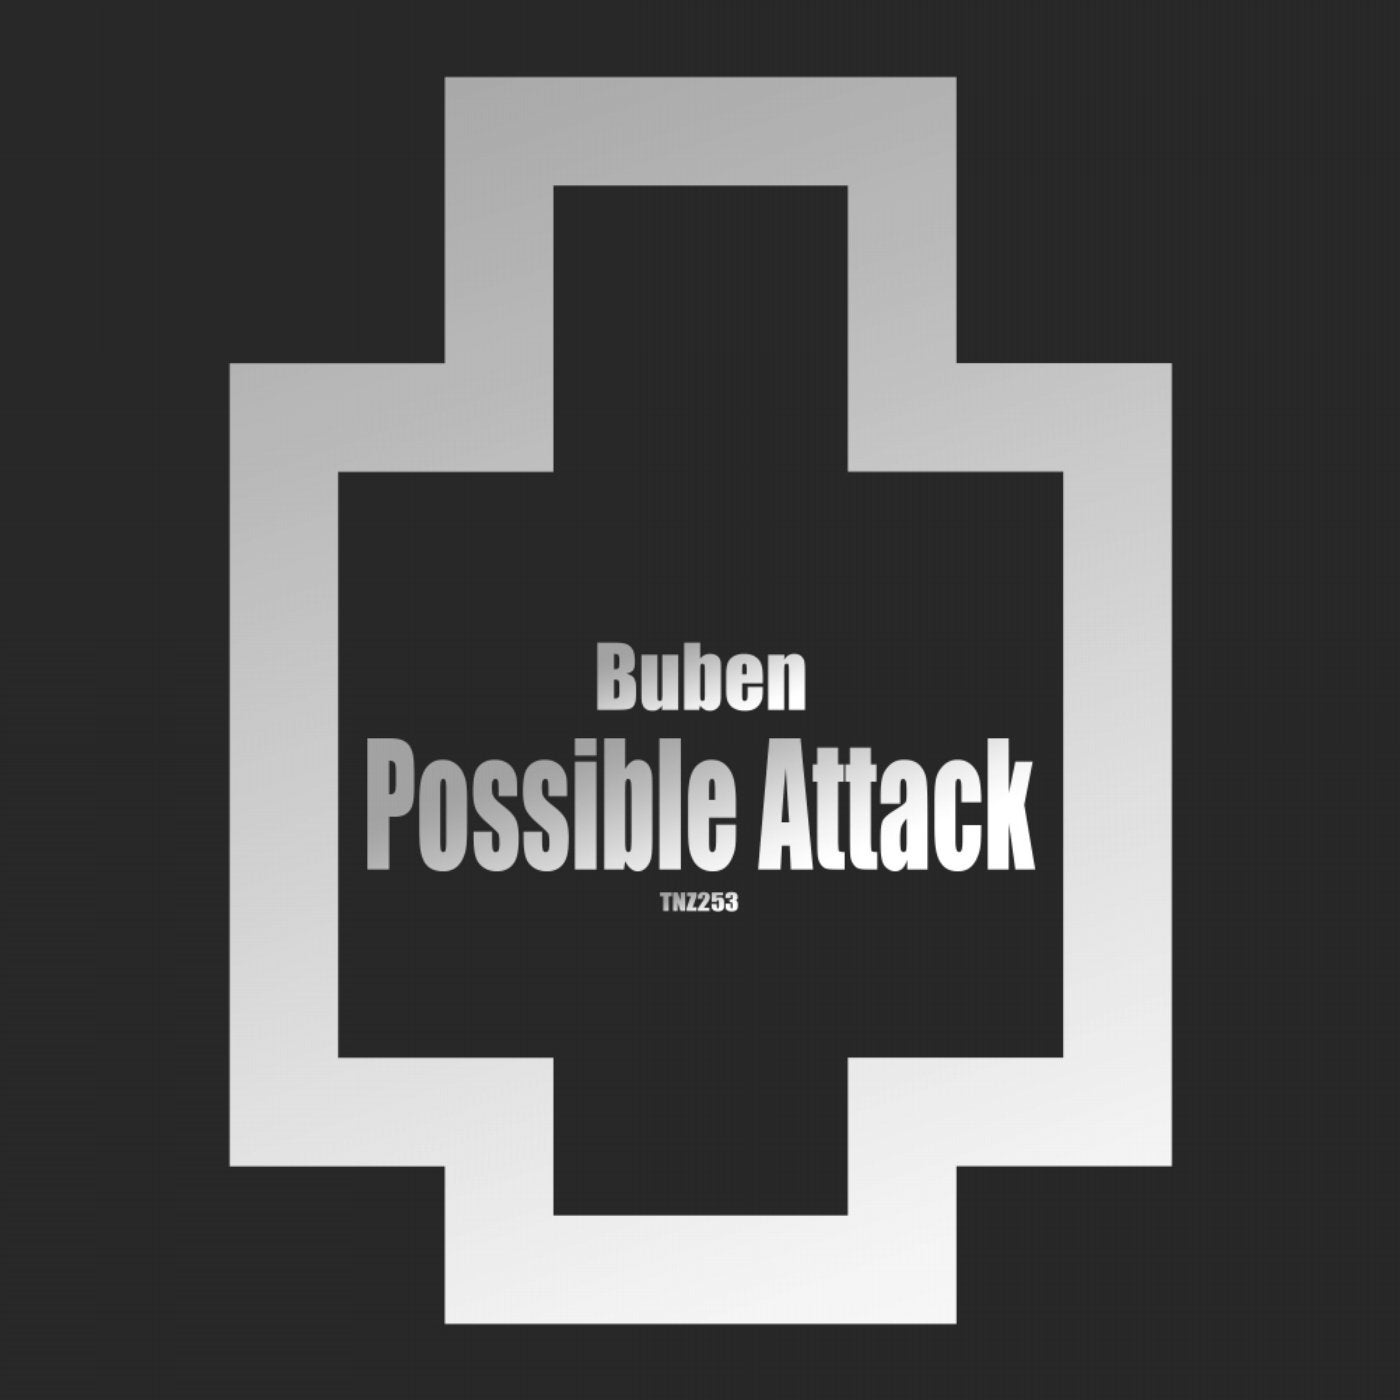 Possible Attack